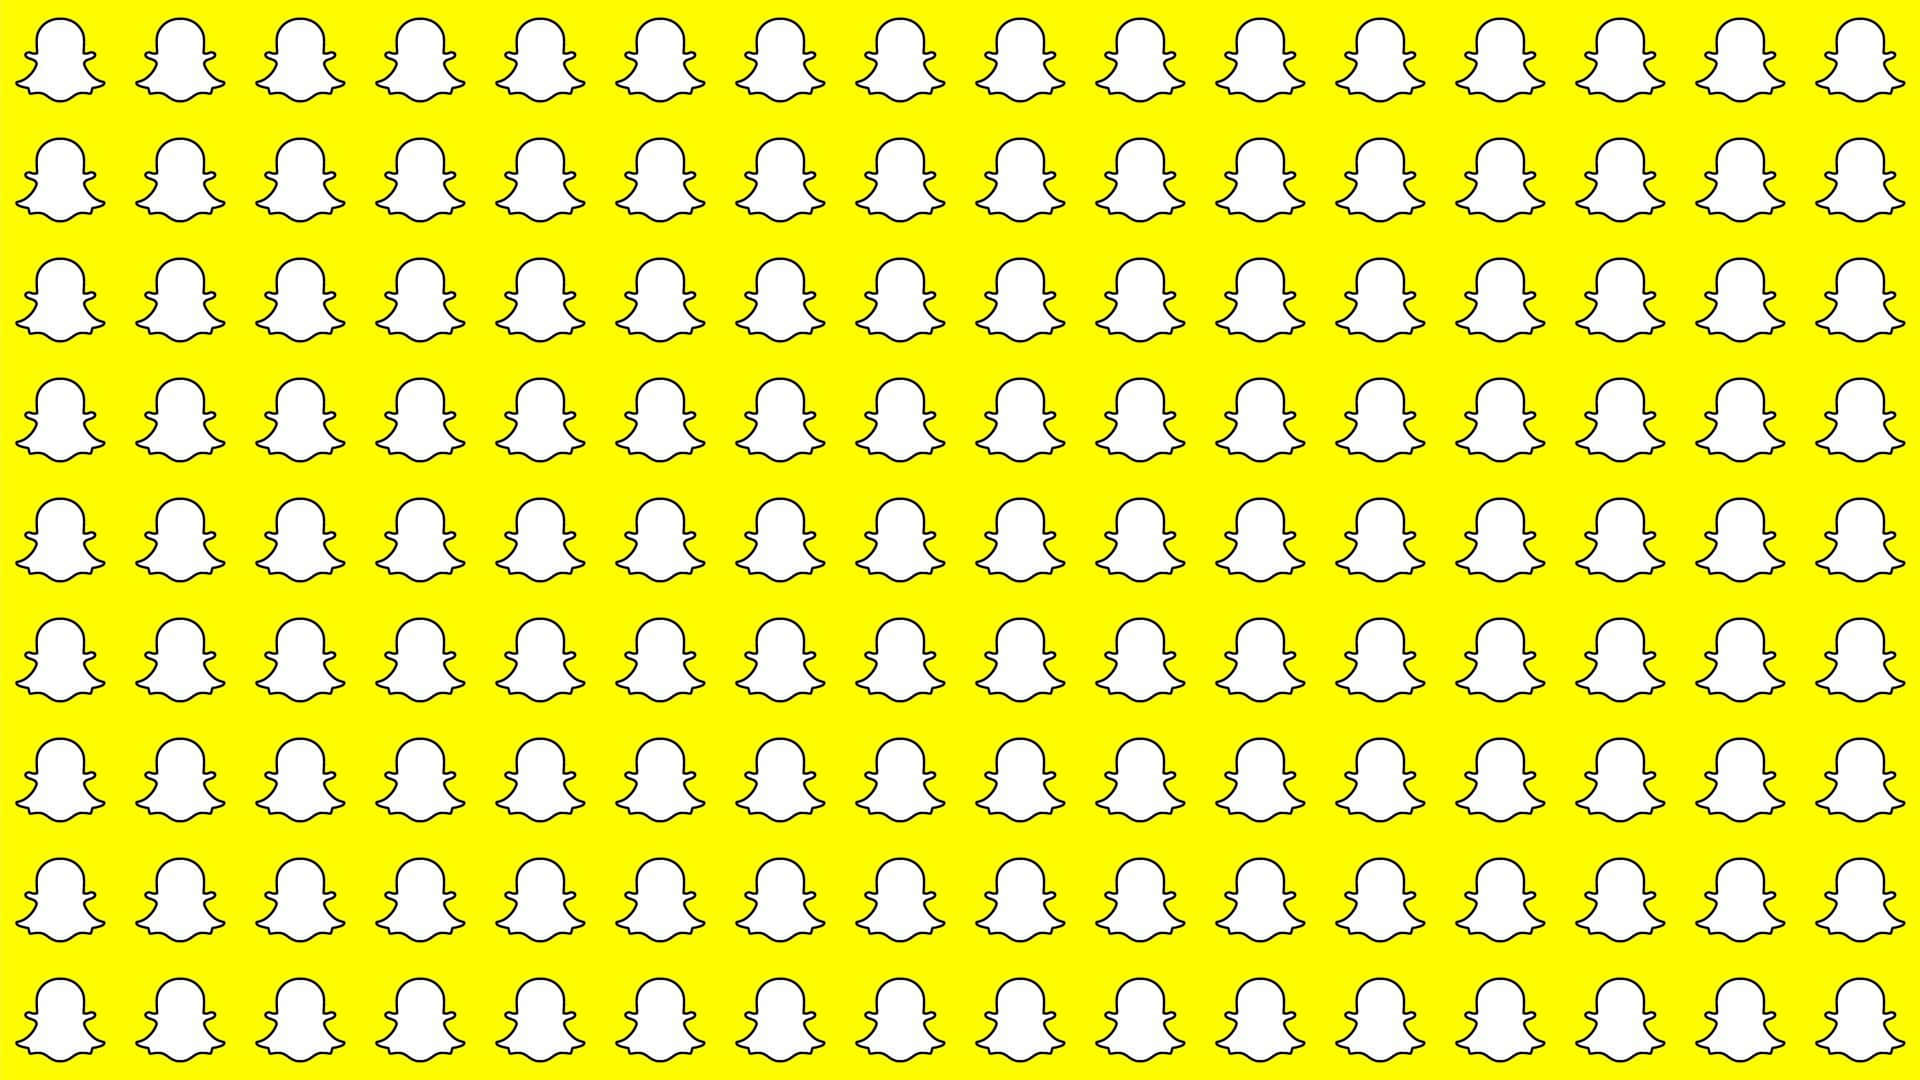 Unlock new snapchat filters with the push of a button